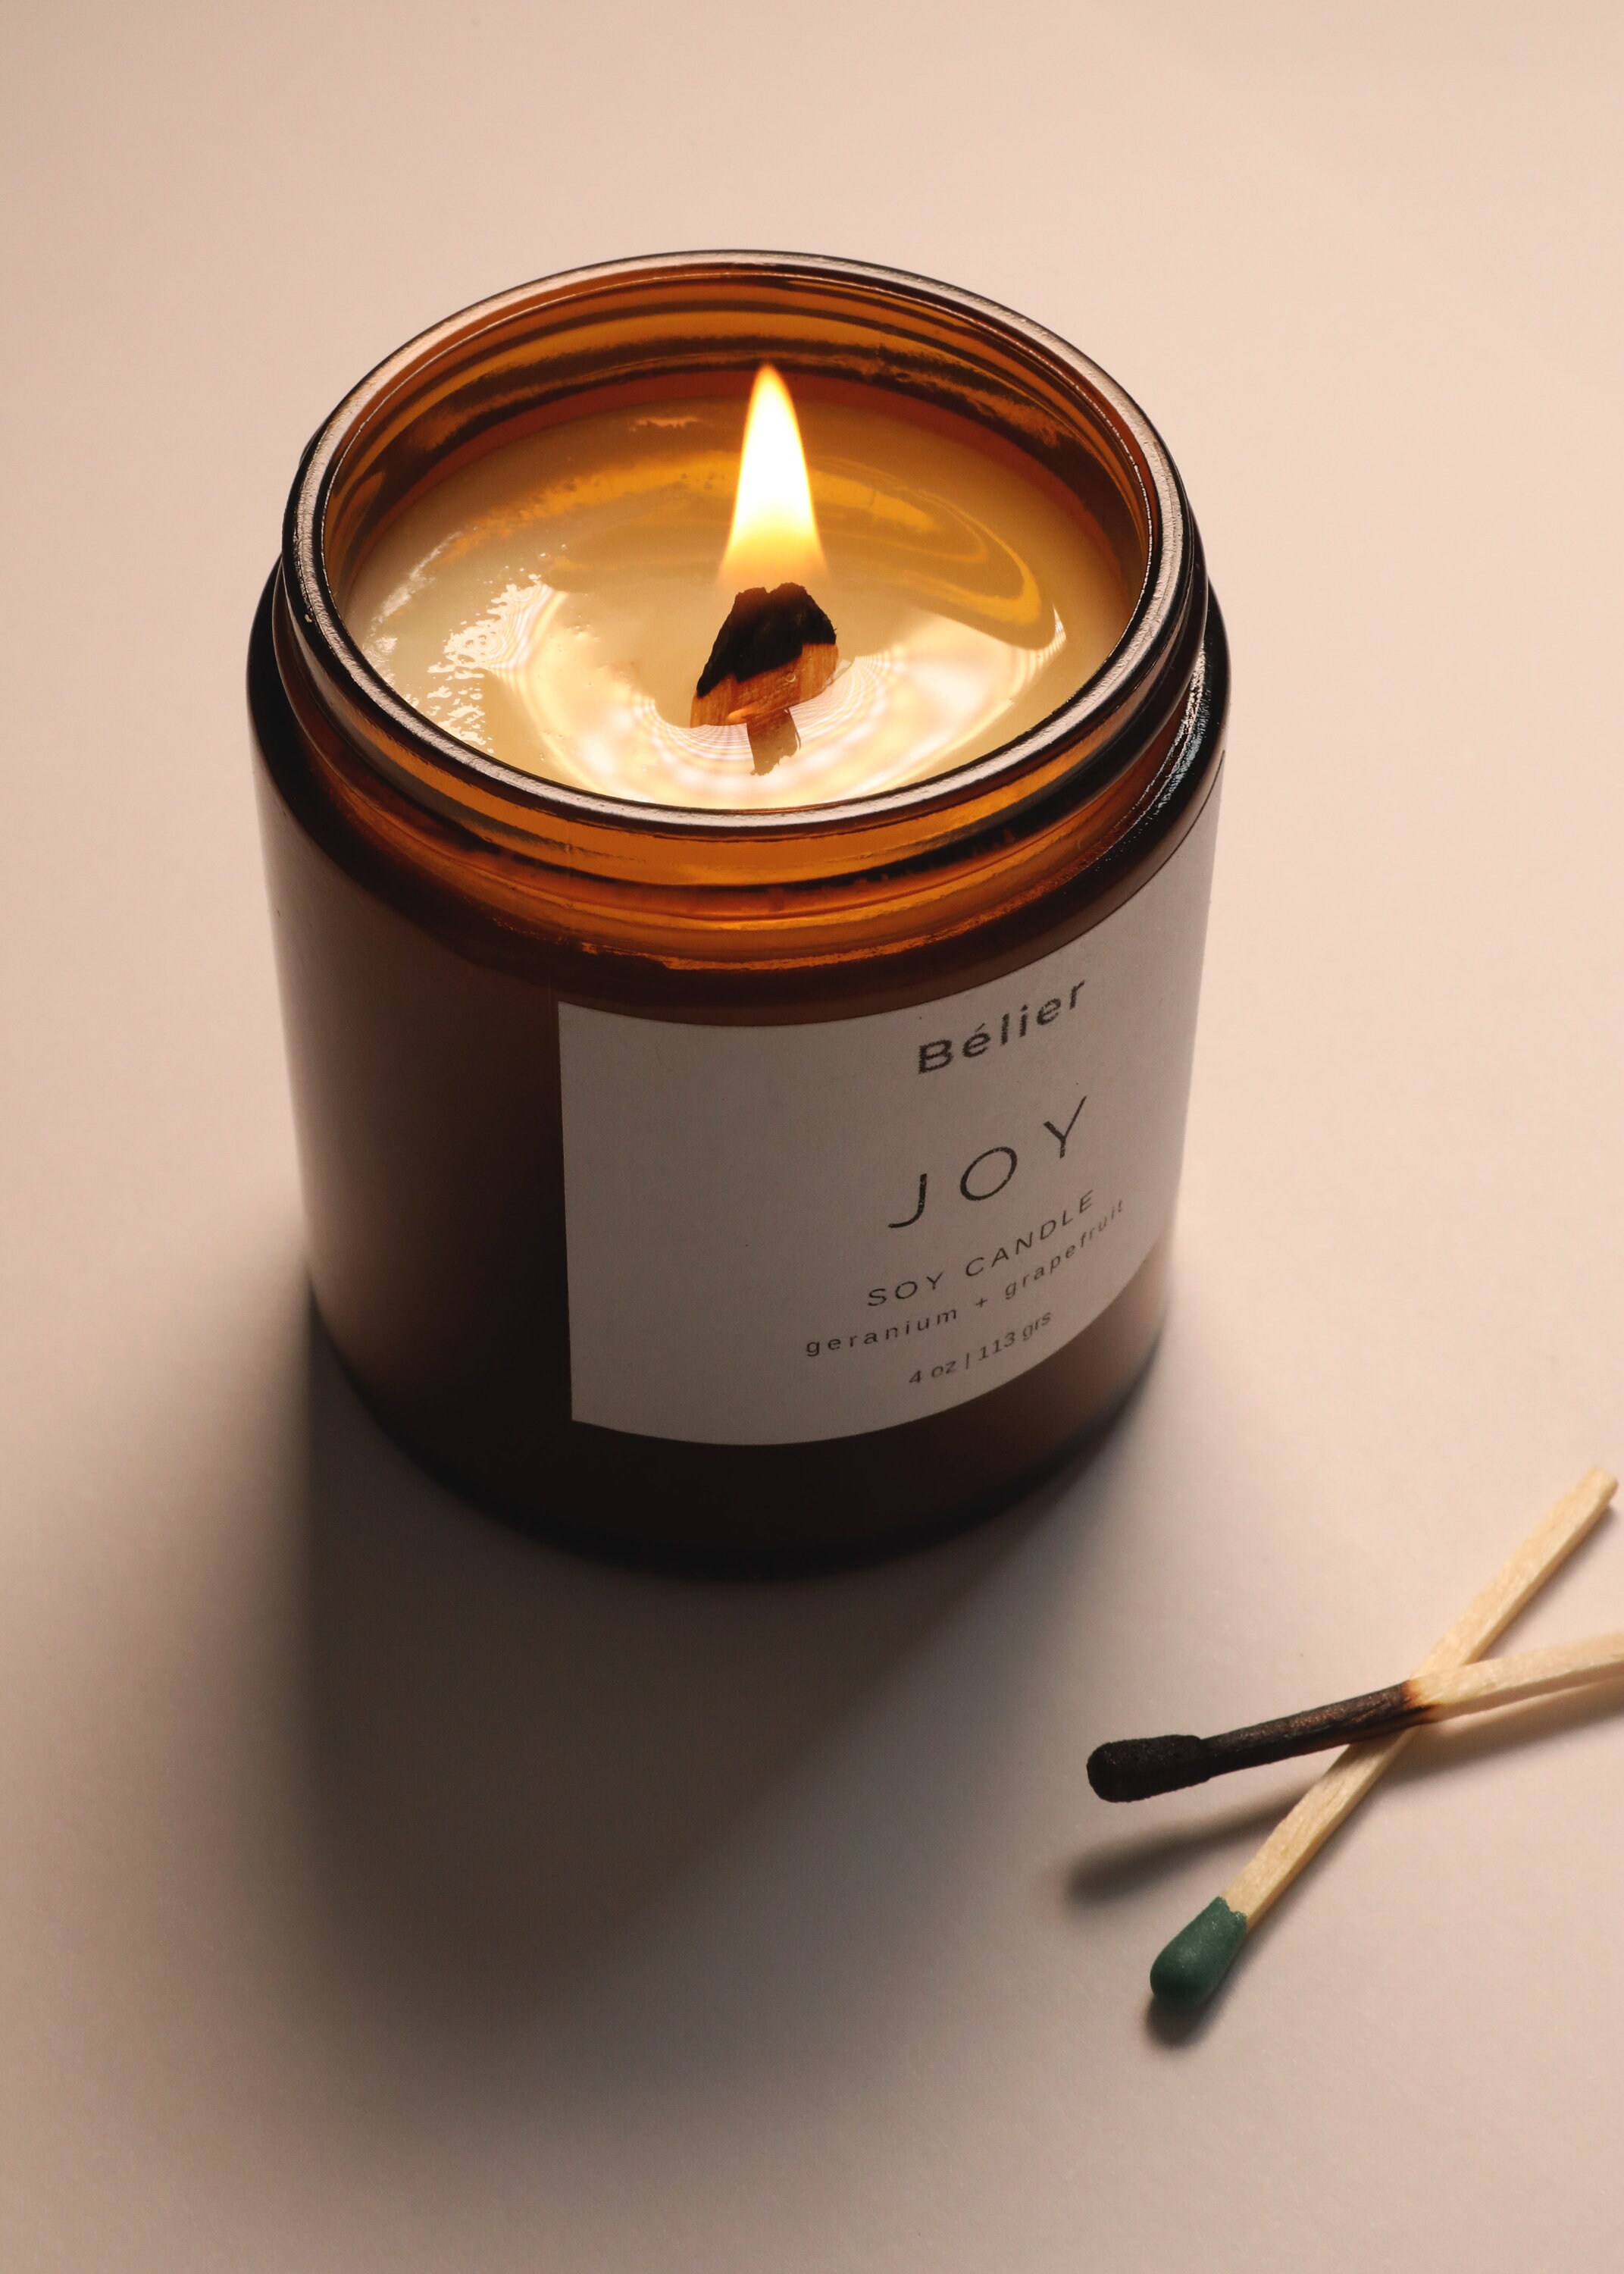 Incense & Spice - Wood Wick Soy Wax Candle – Little Bull Falls